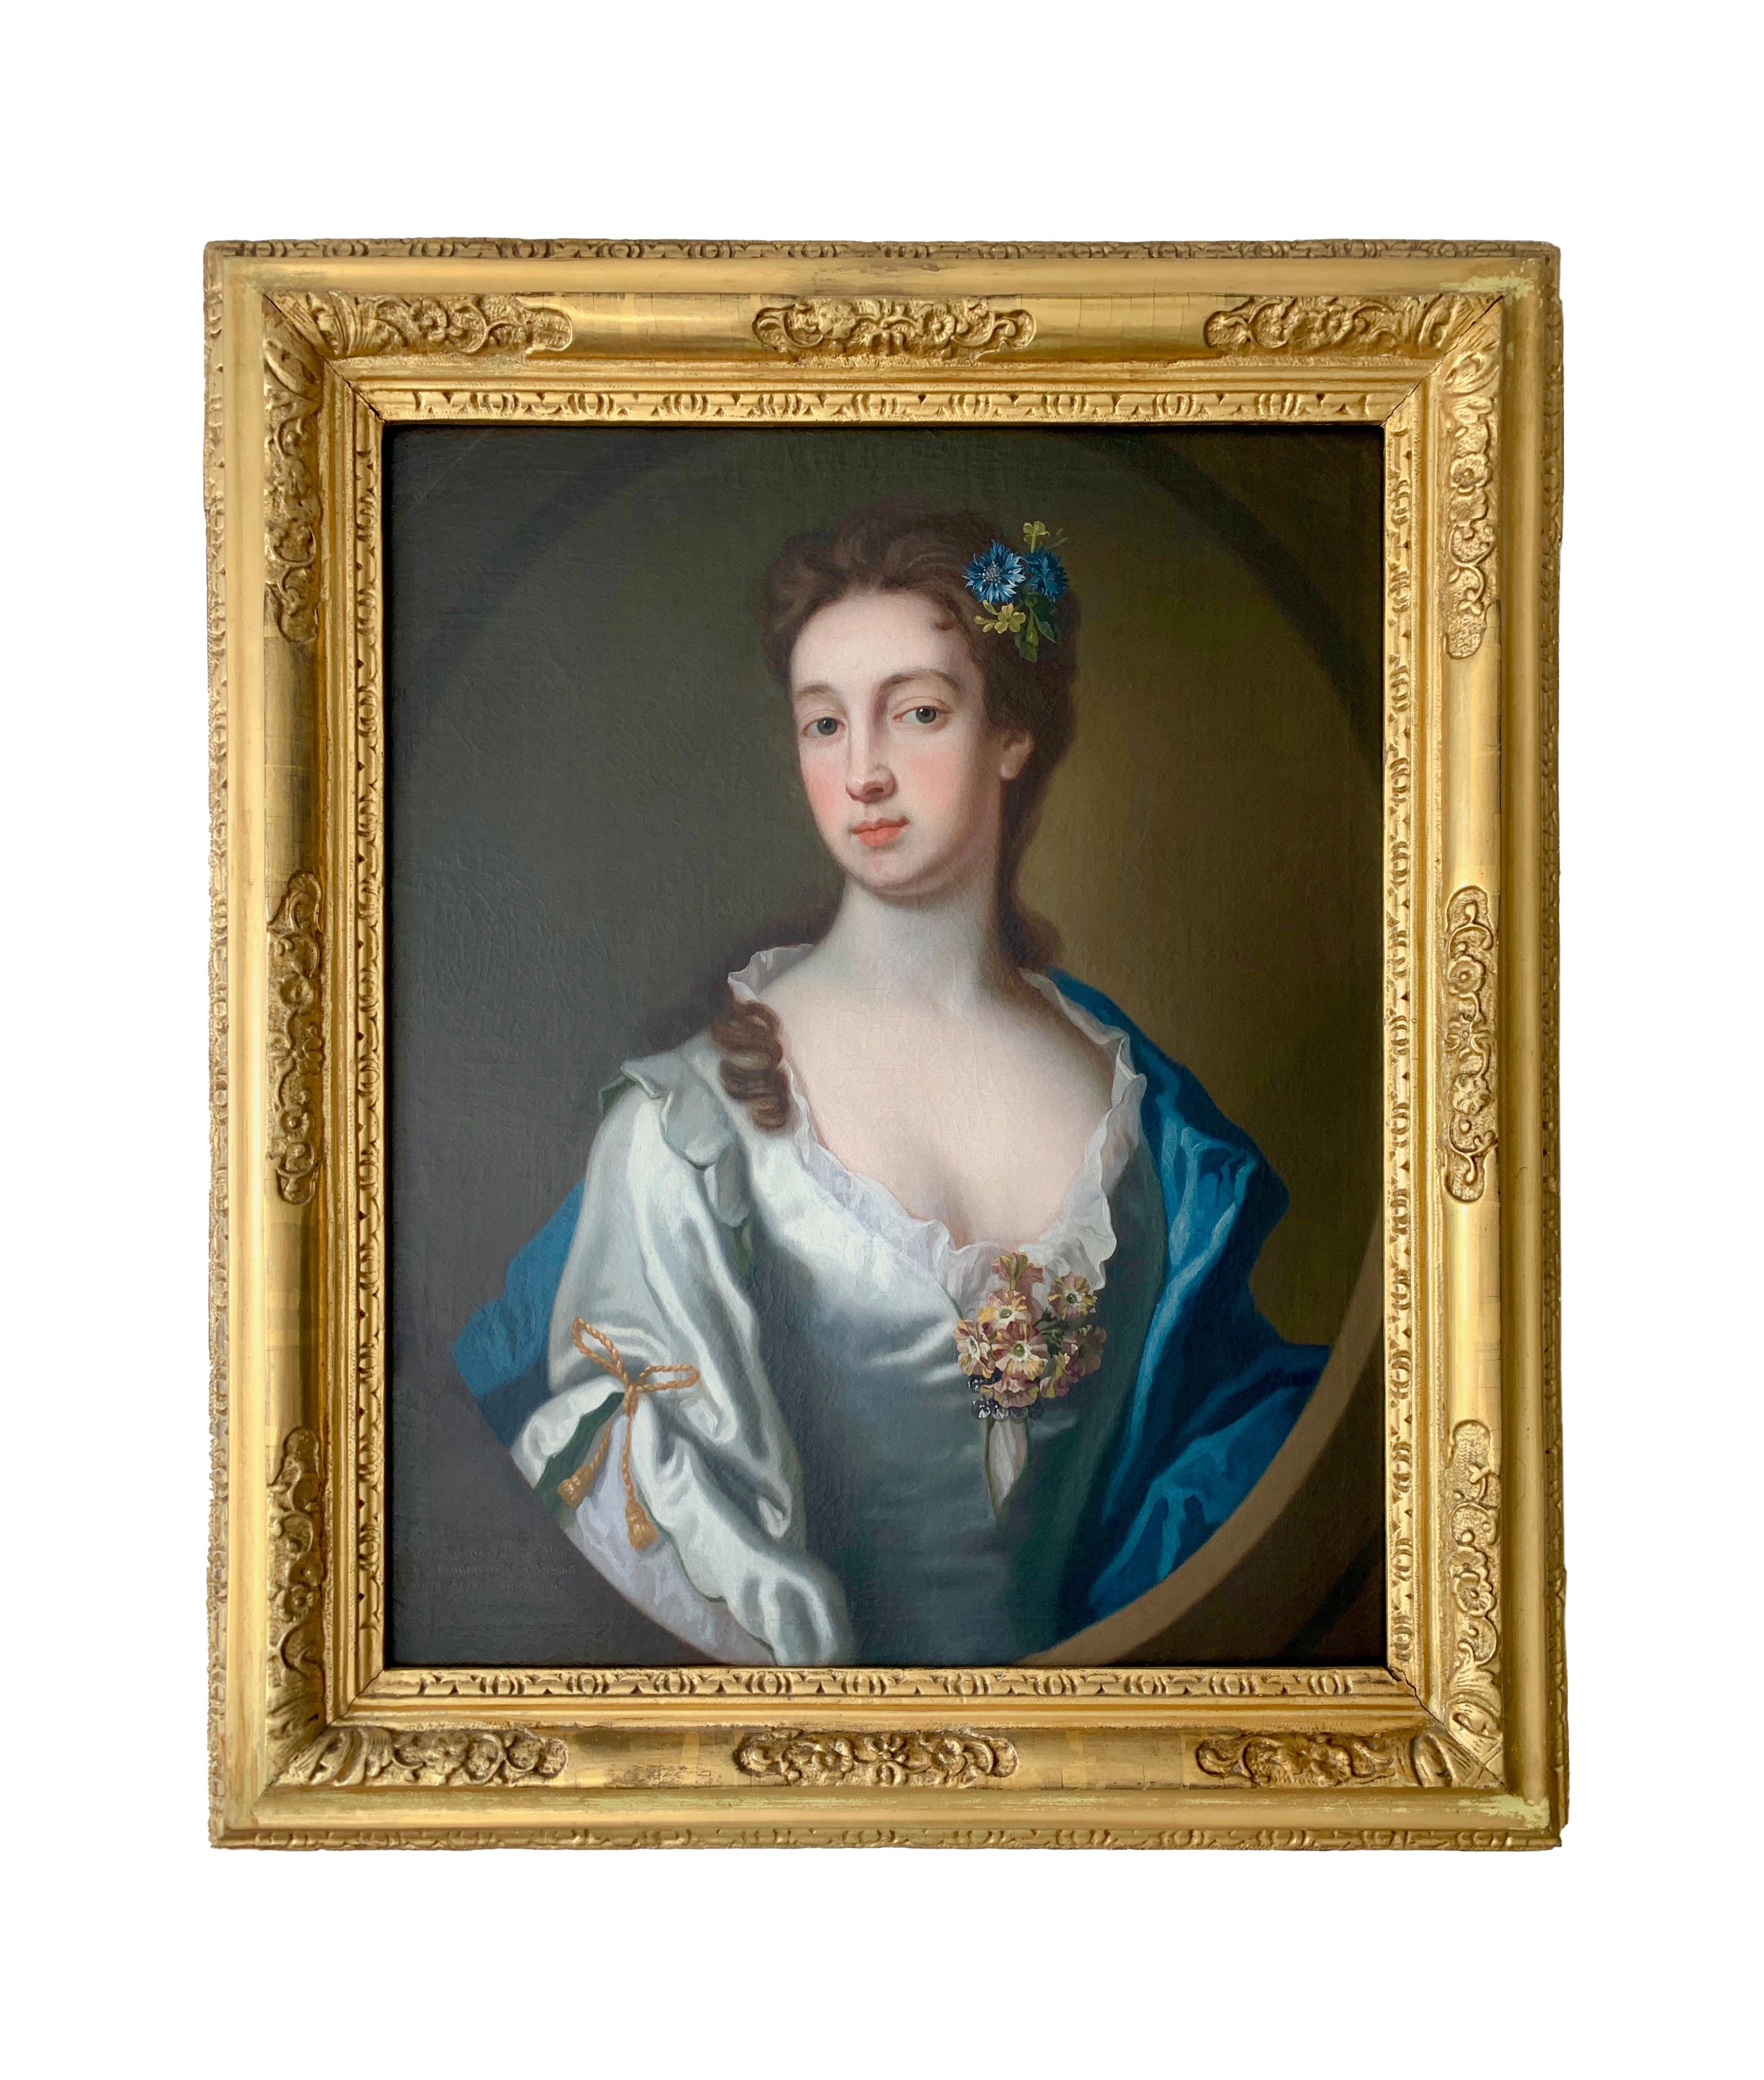 18th Century English Portrait of a Lady in a White and Blue Silk Dress. - Painting by Attributed to George Knapton